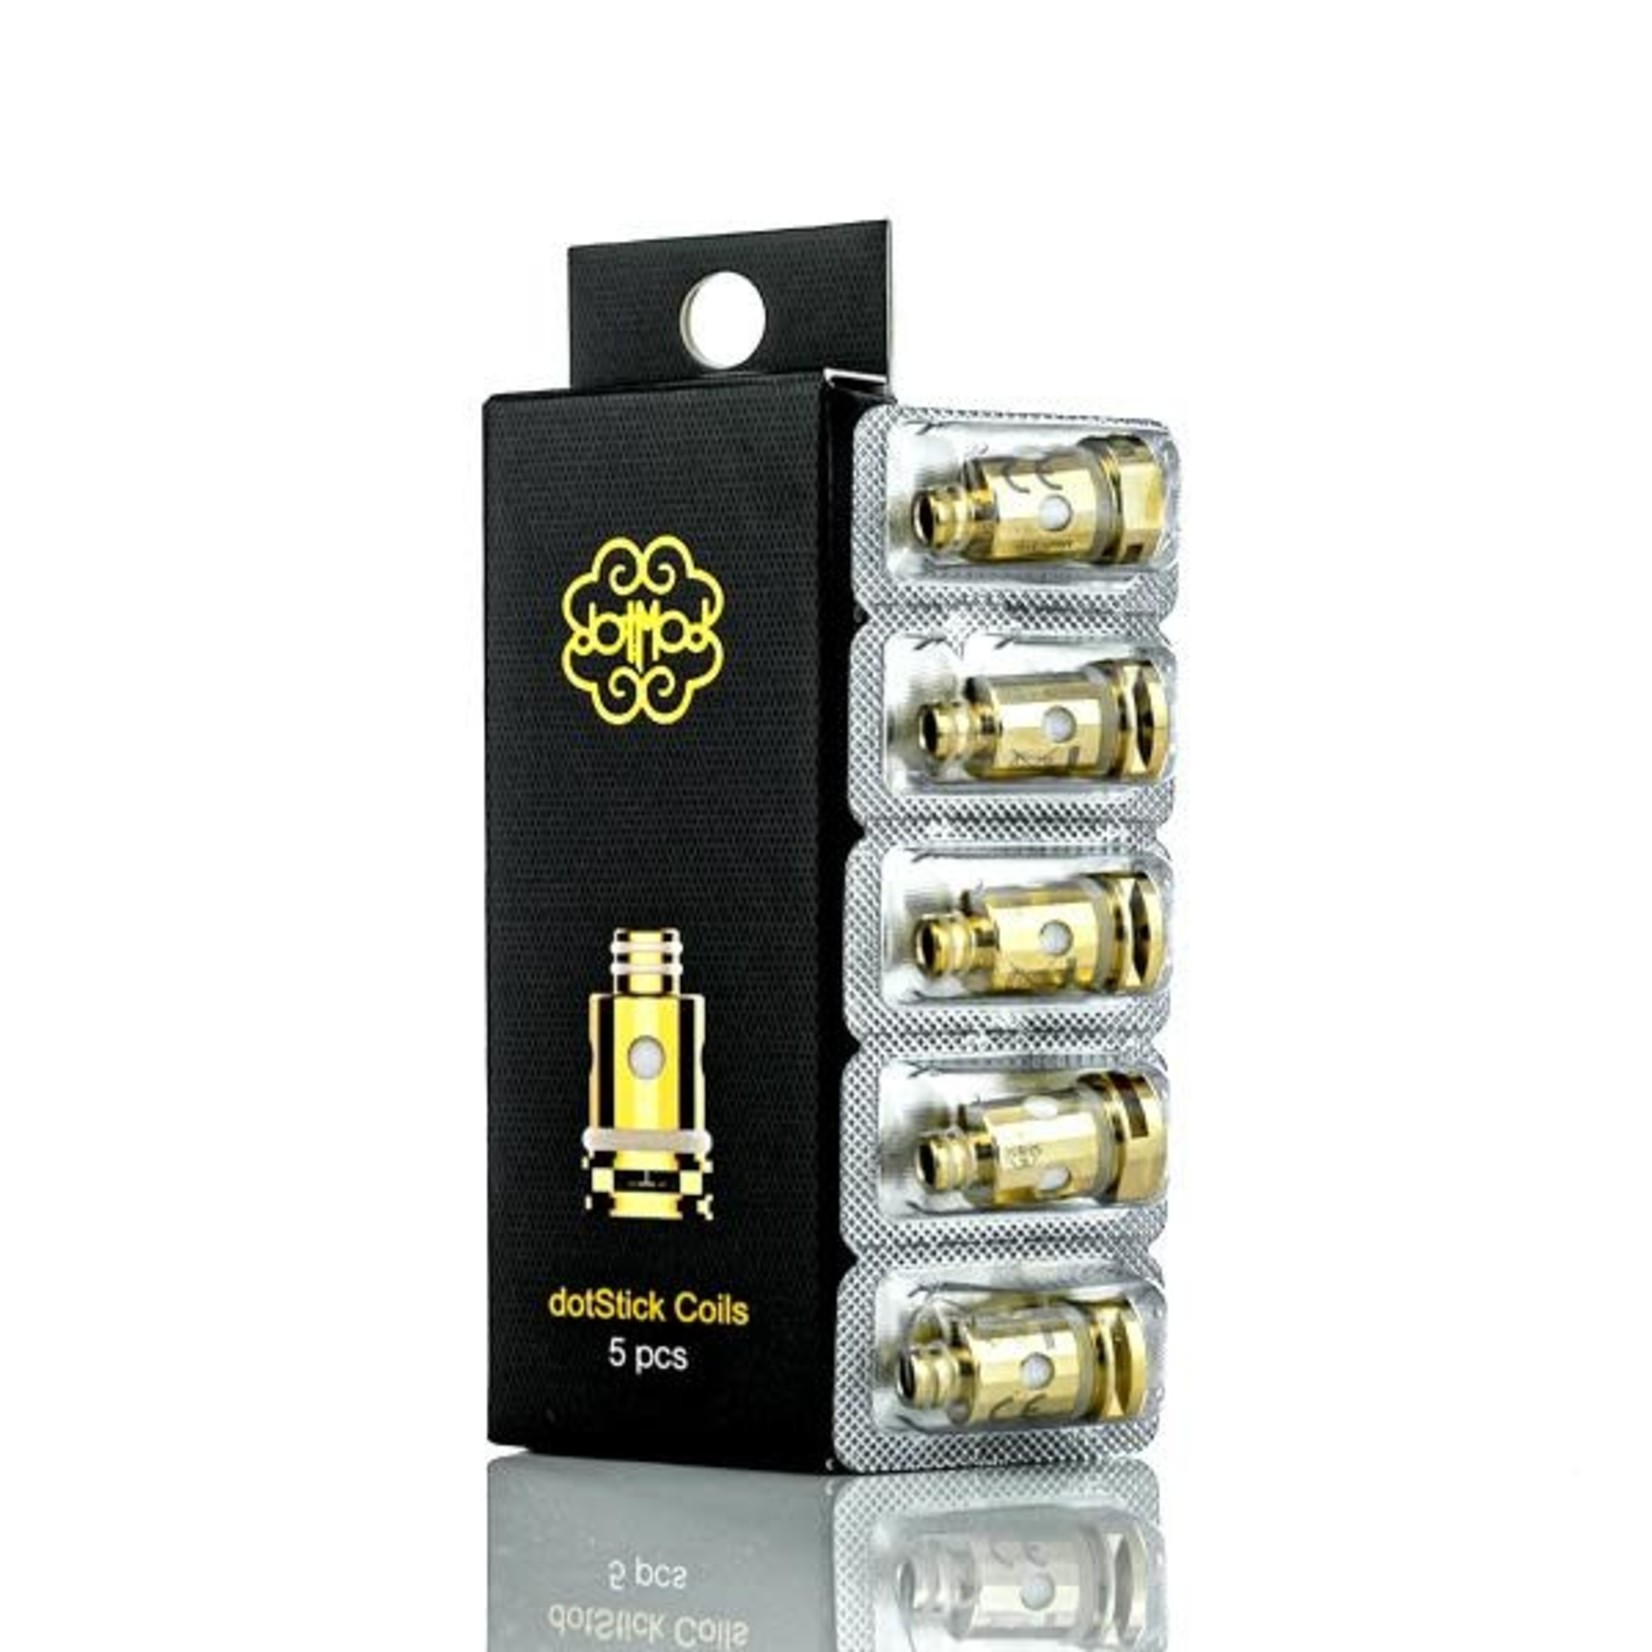 dotMod dotStick Coil (Box of 5)